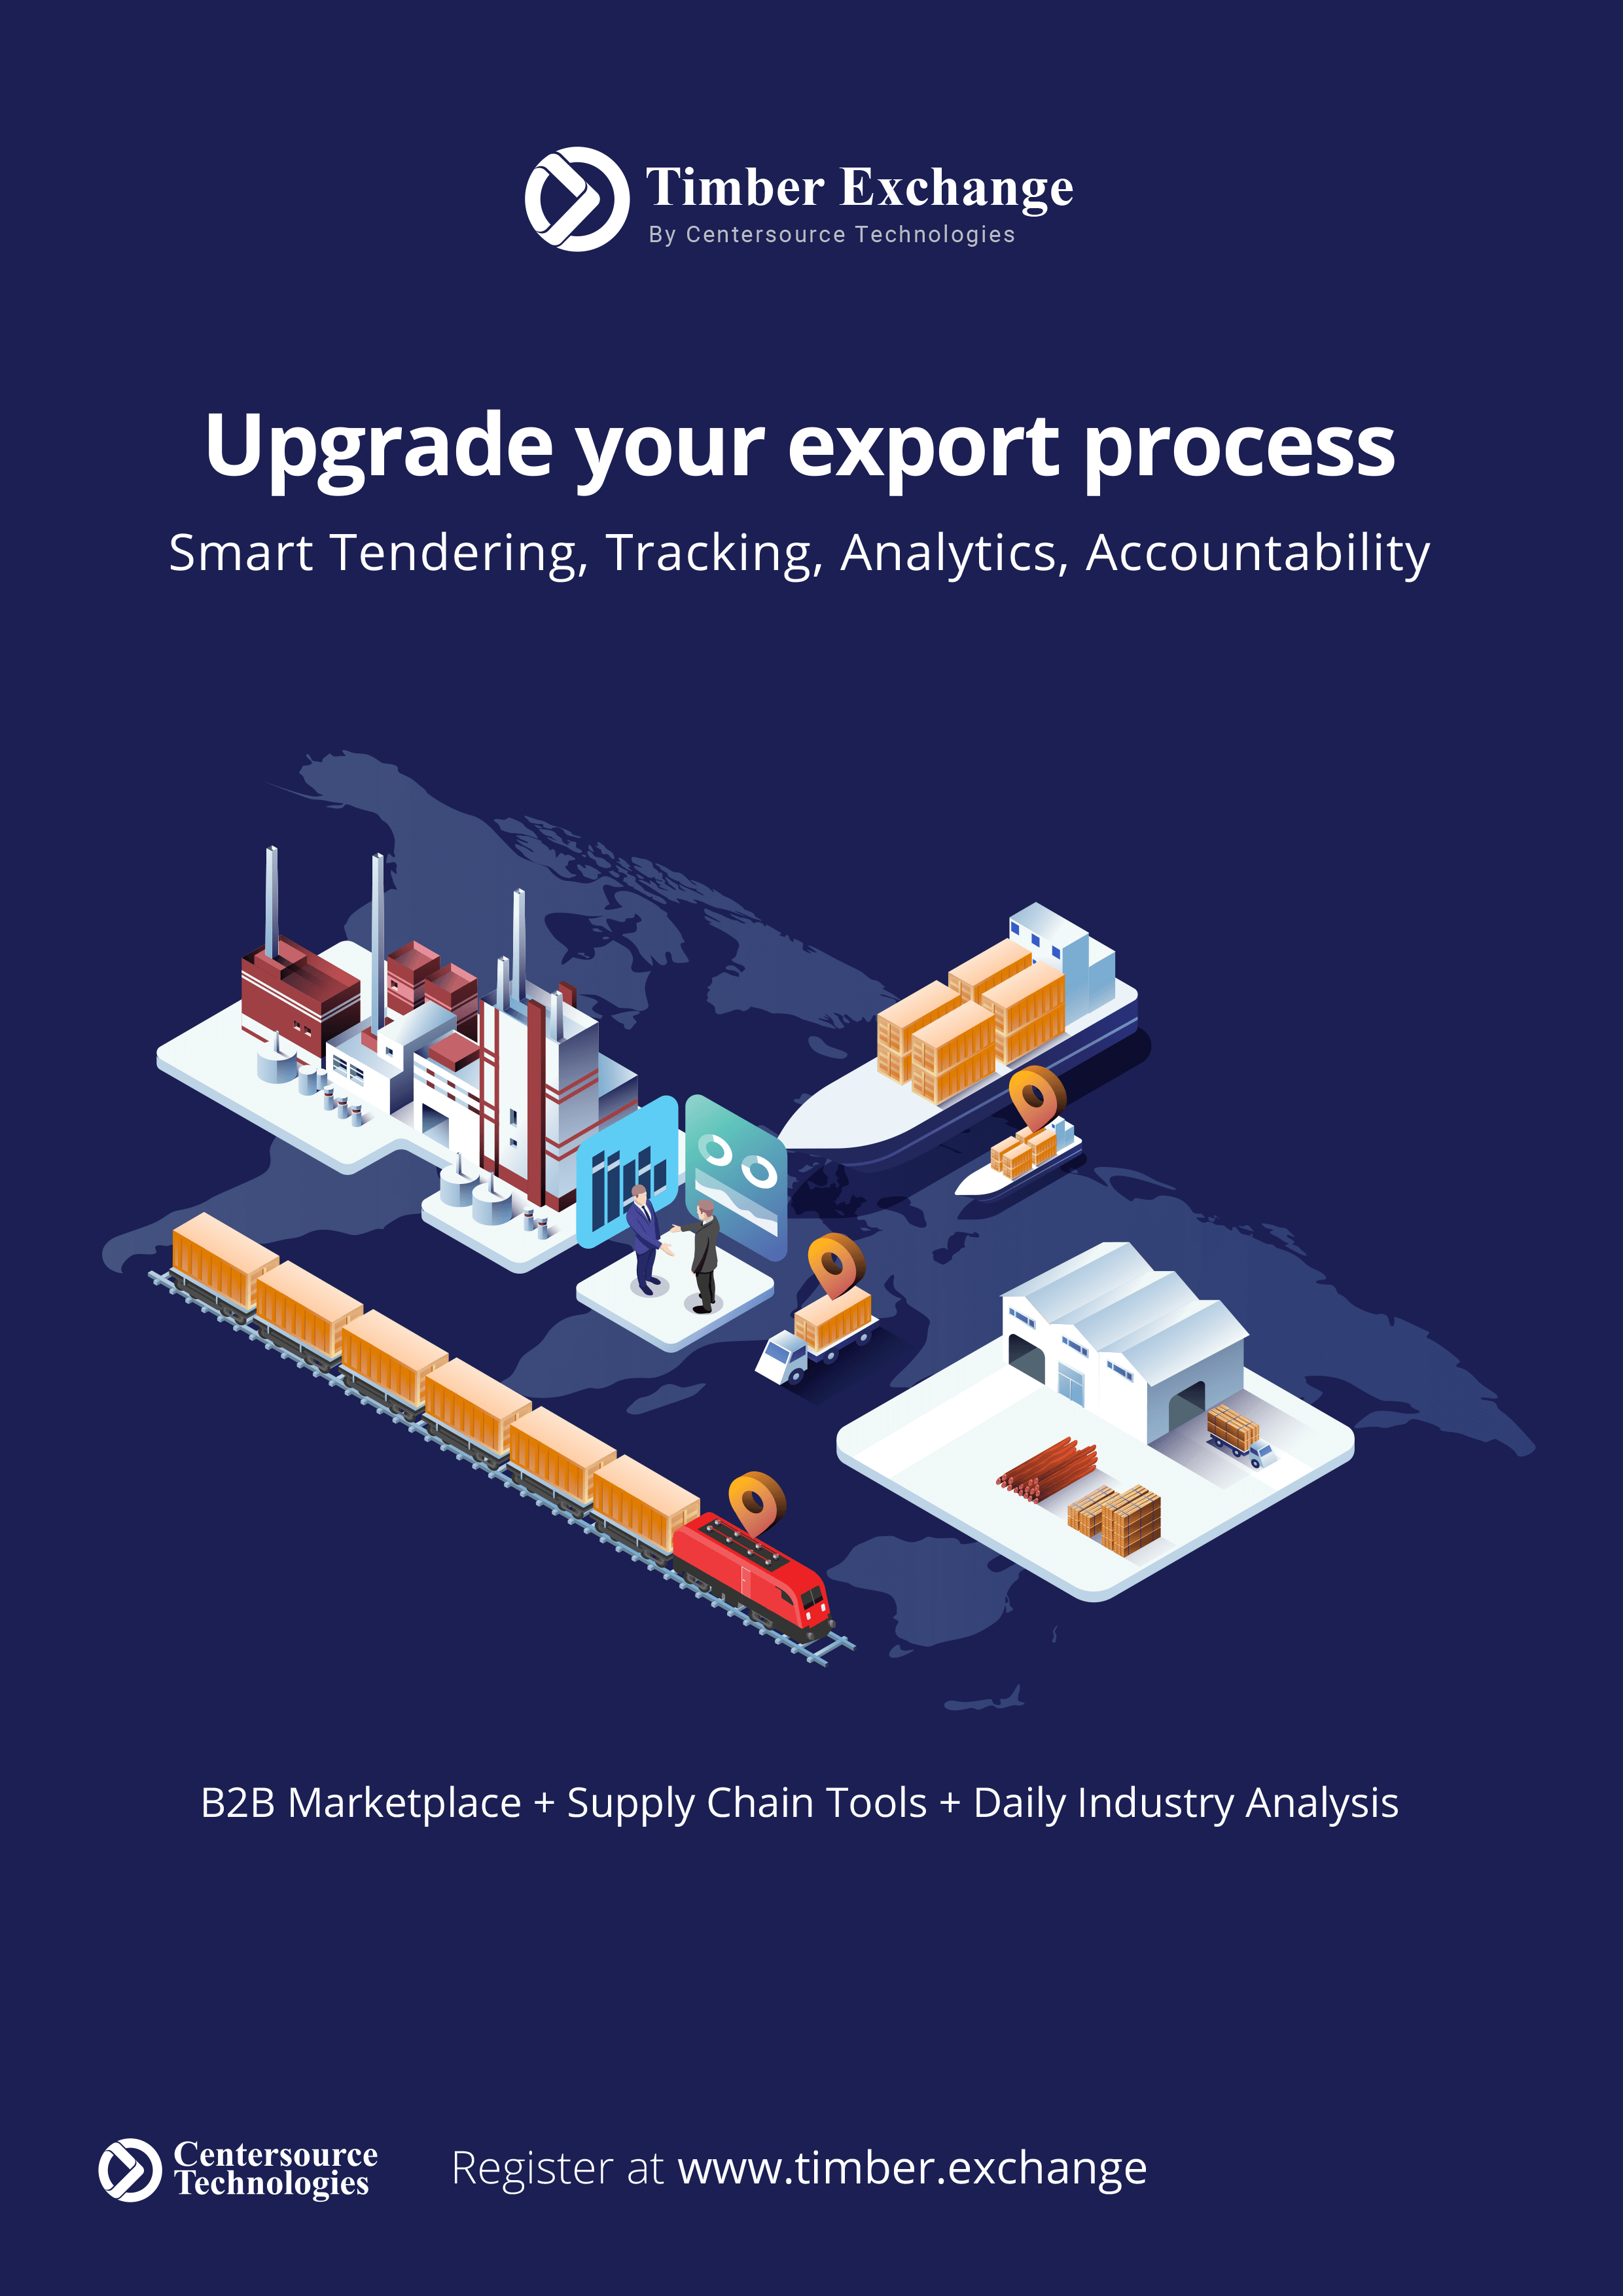 Upgrade your export process with Timber Exchange 